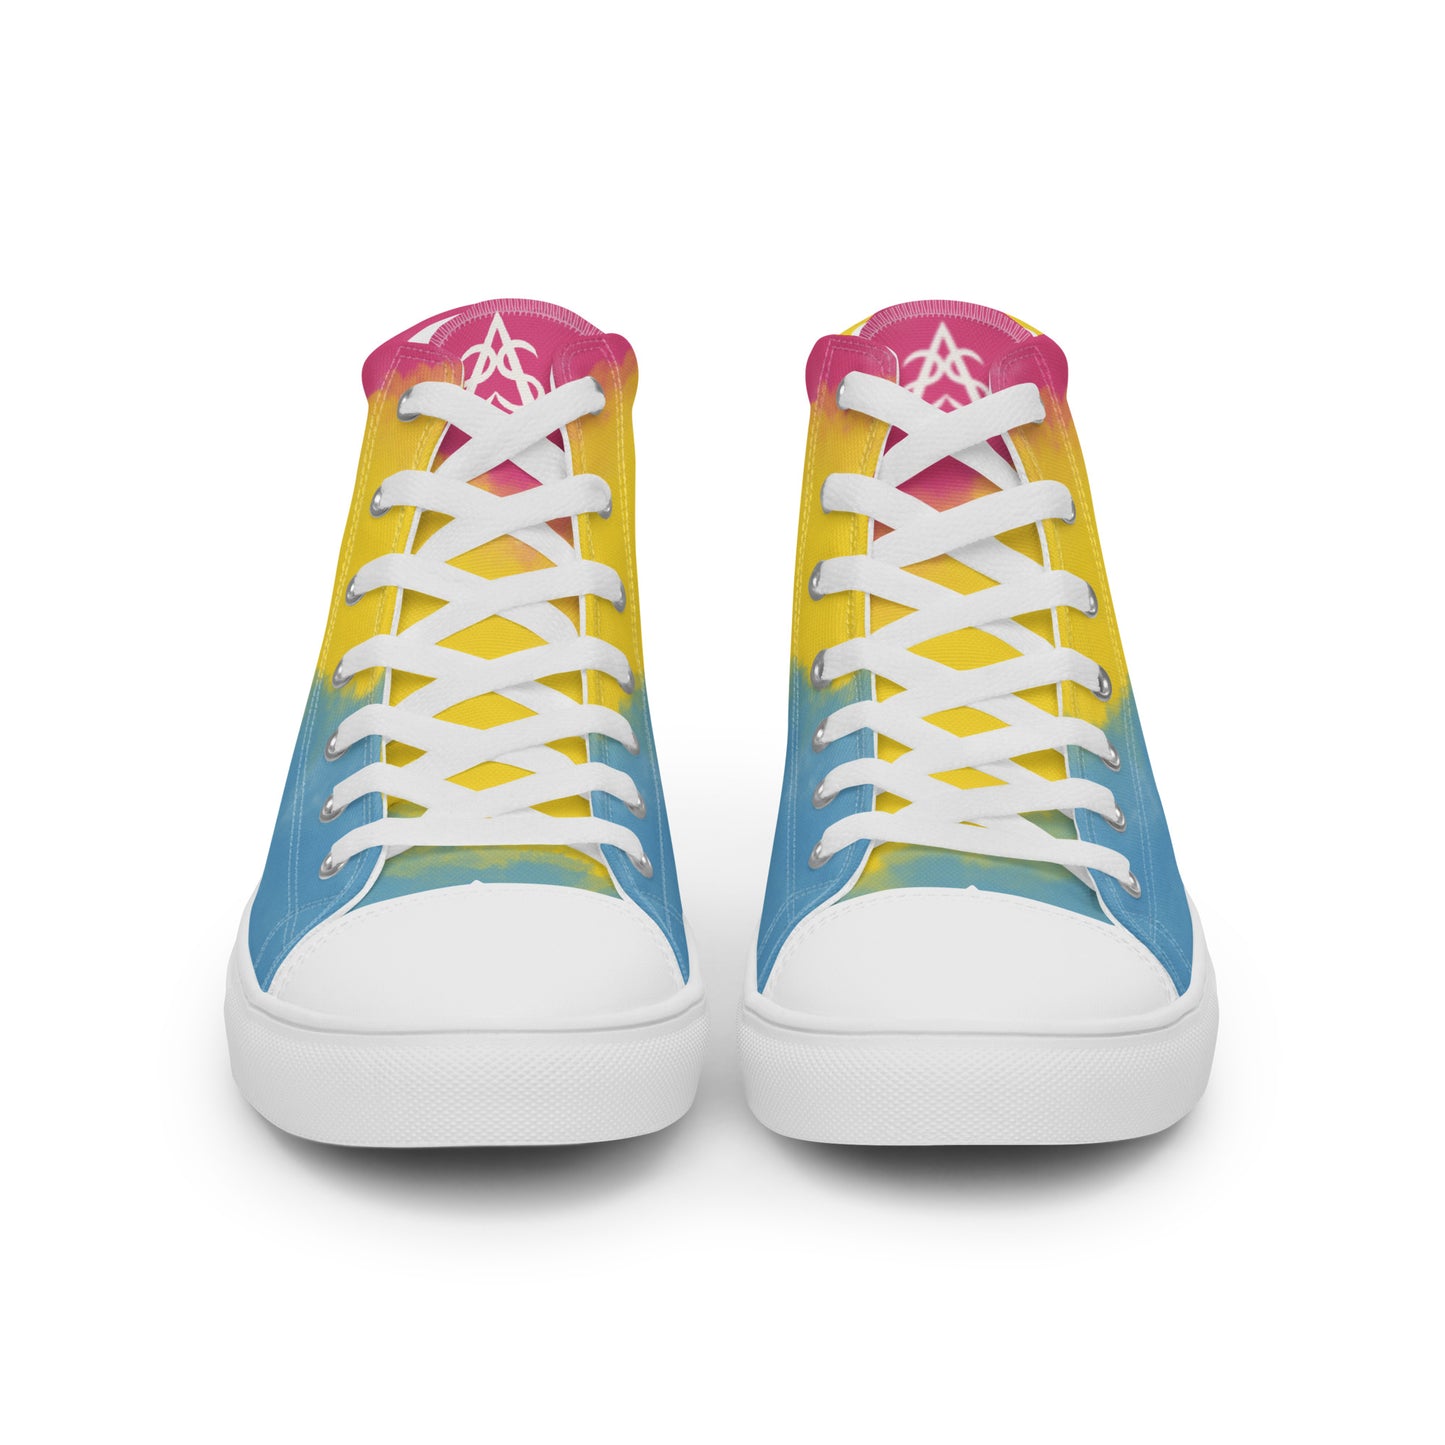 Front view: a pair of high top shoes with color block pink, yellow, and blue clouds, a white hand drawn heart, and the Aras Sivad logo on the back.